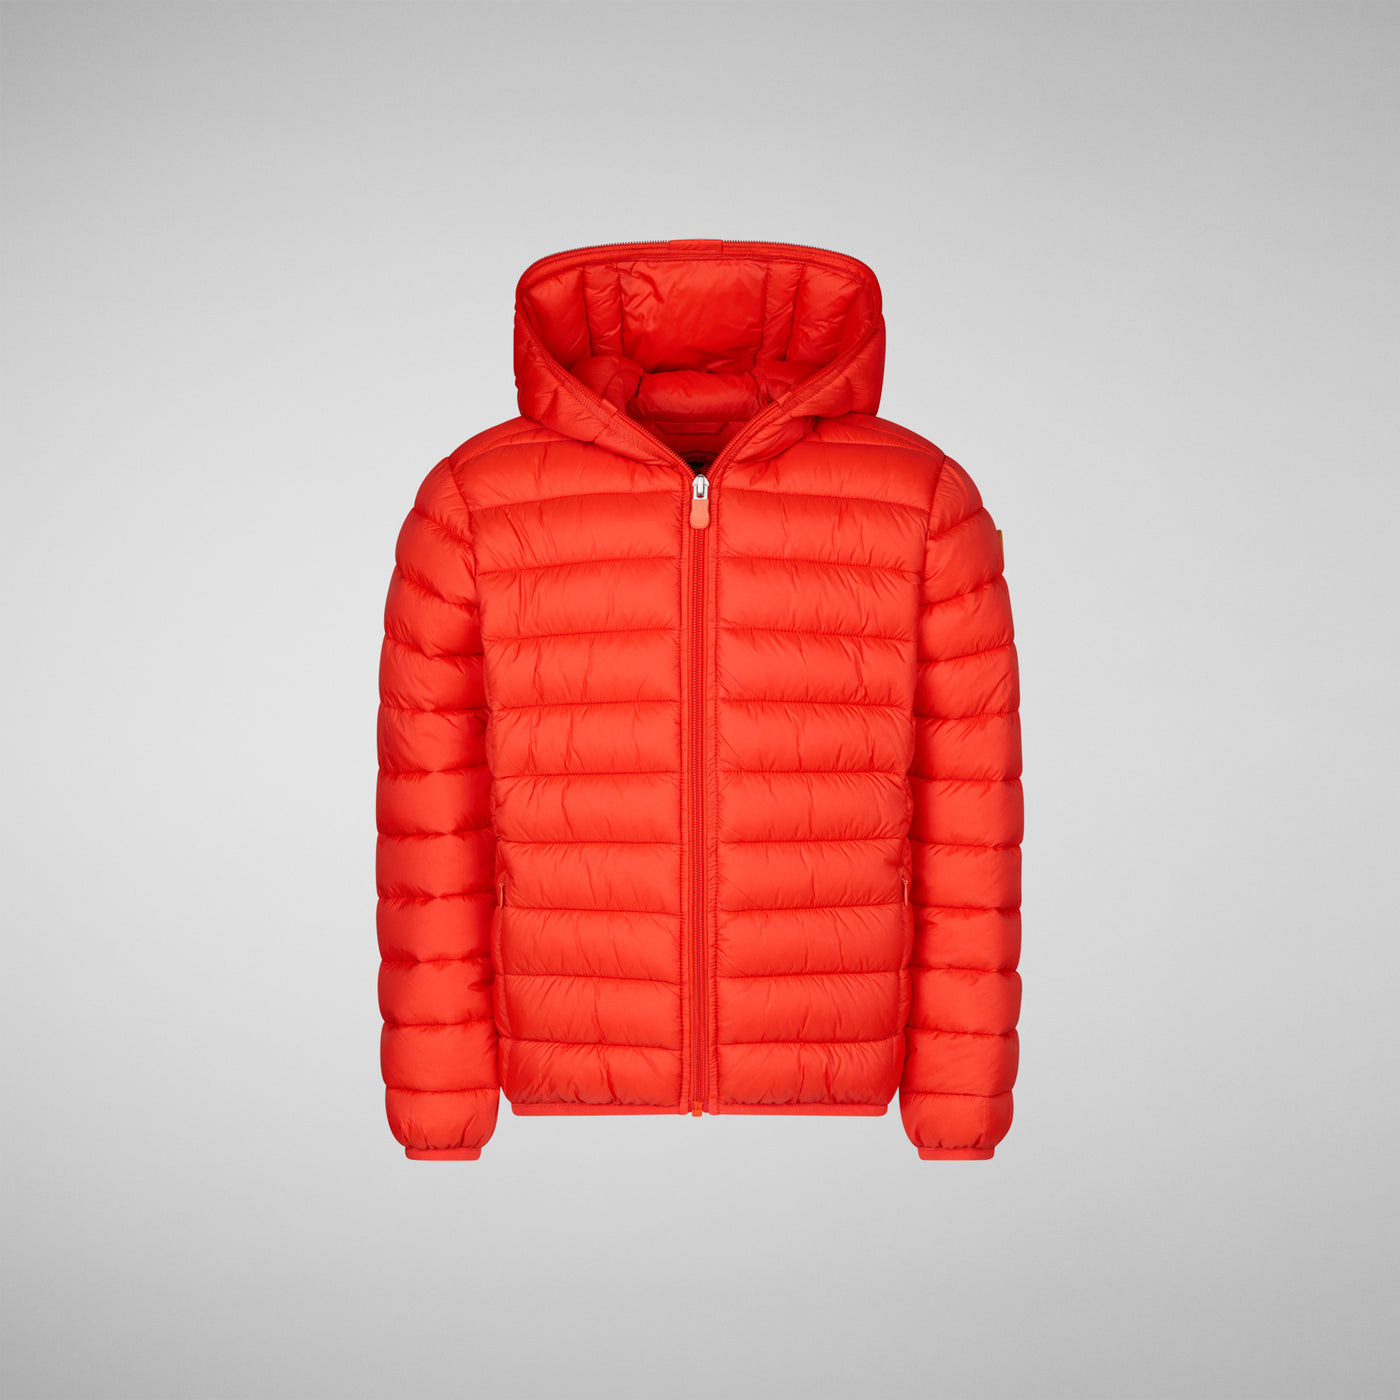 Boys' Dony Hooded Puffer Jacket in Poppy Red